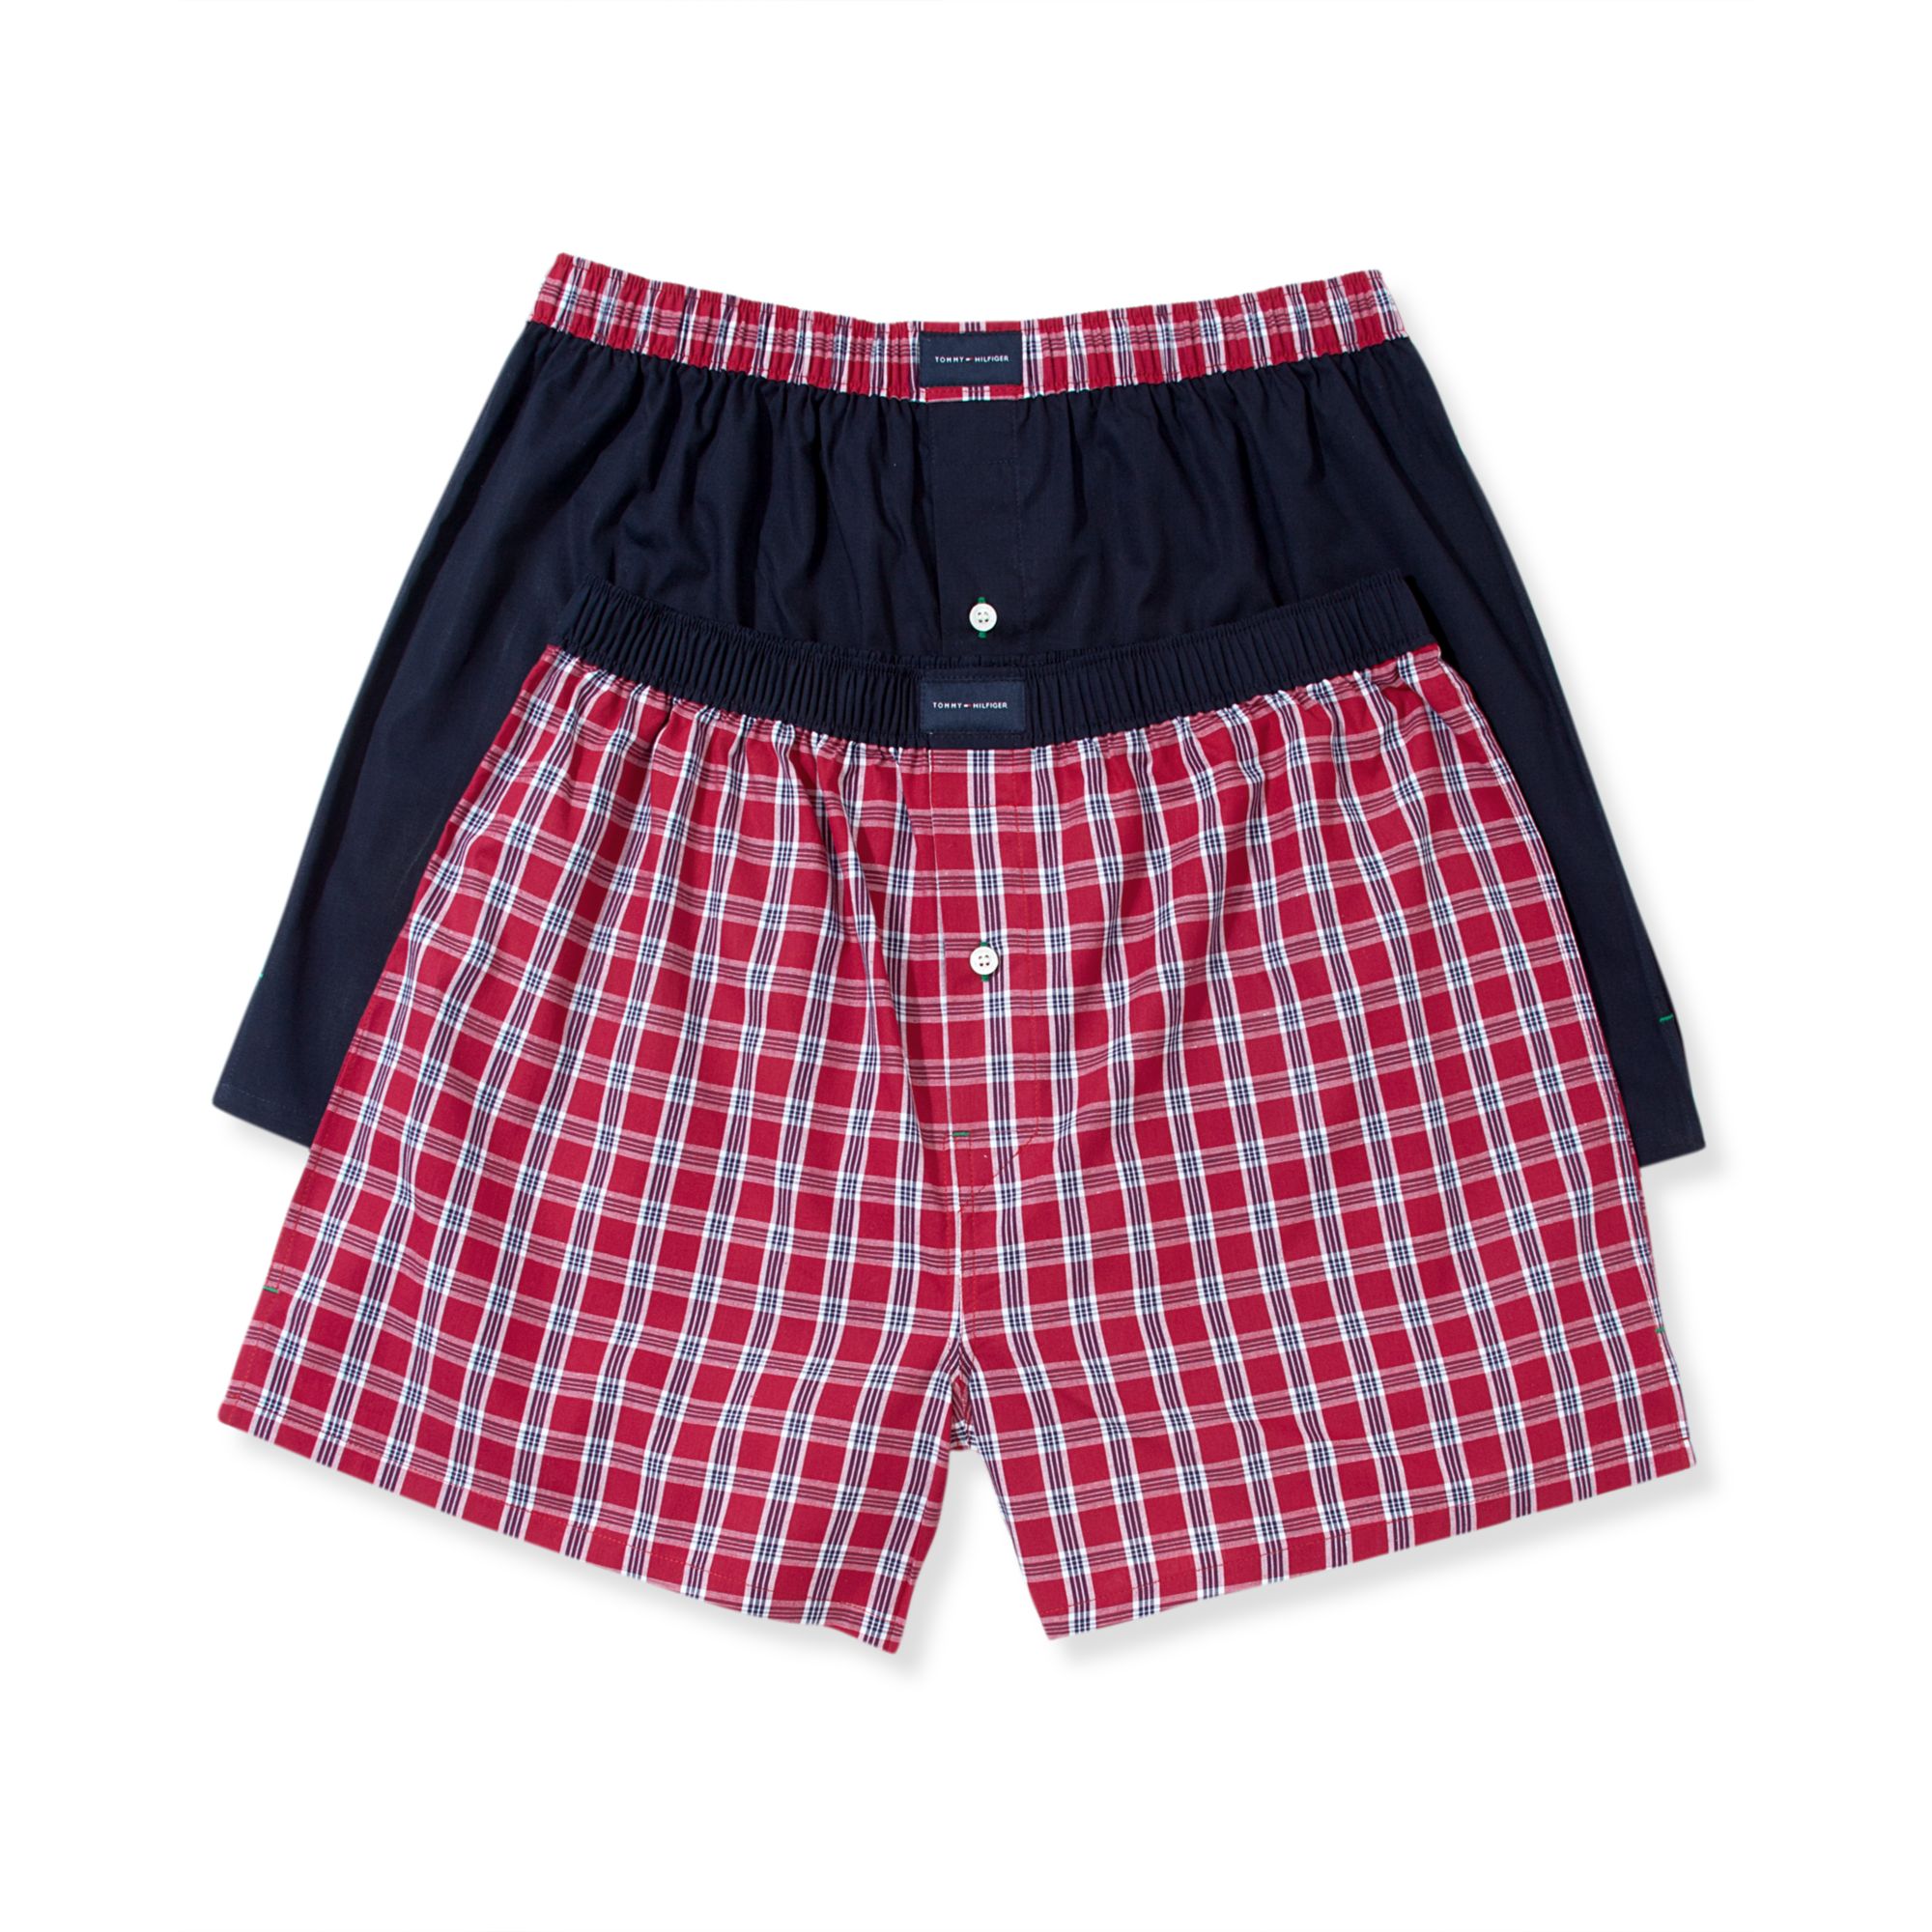 Lyst - Tommy Hilfiger Woven Boxer 2 Pack Gift Set in Red for Men